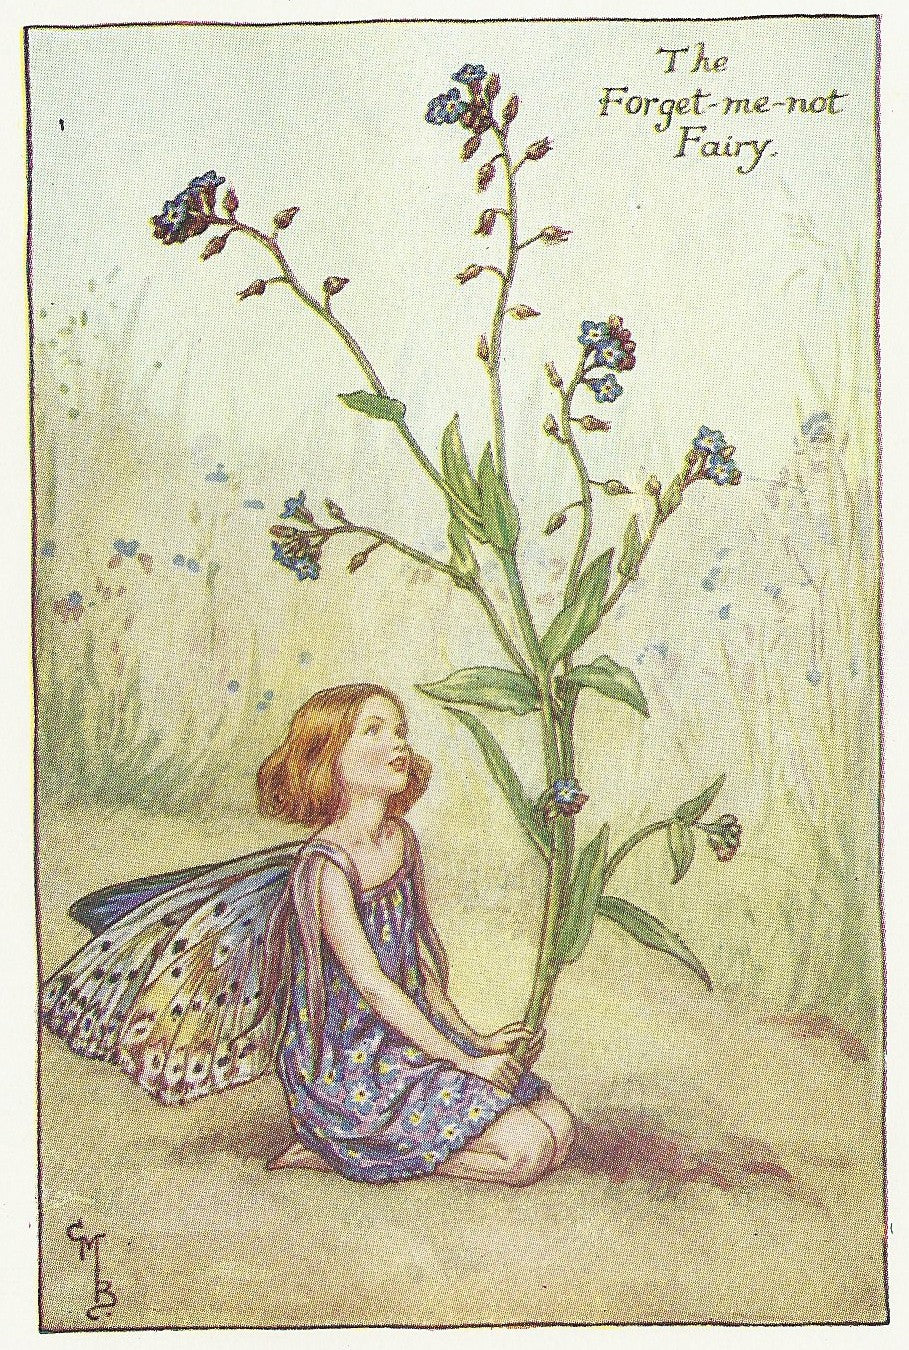 Flowers Forget-me-not Fairy original old print